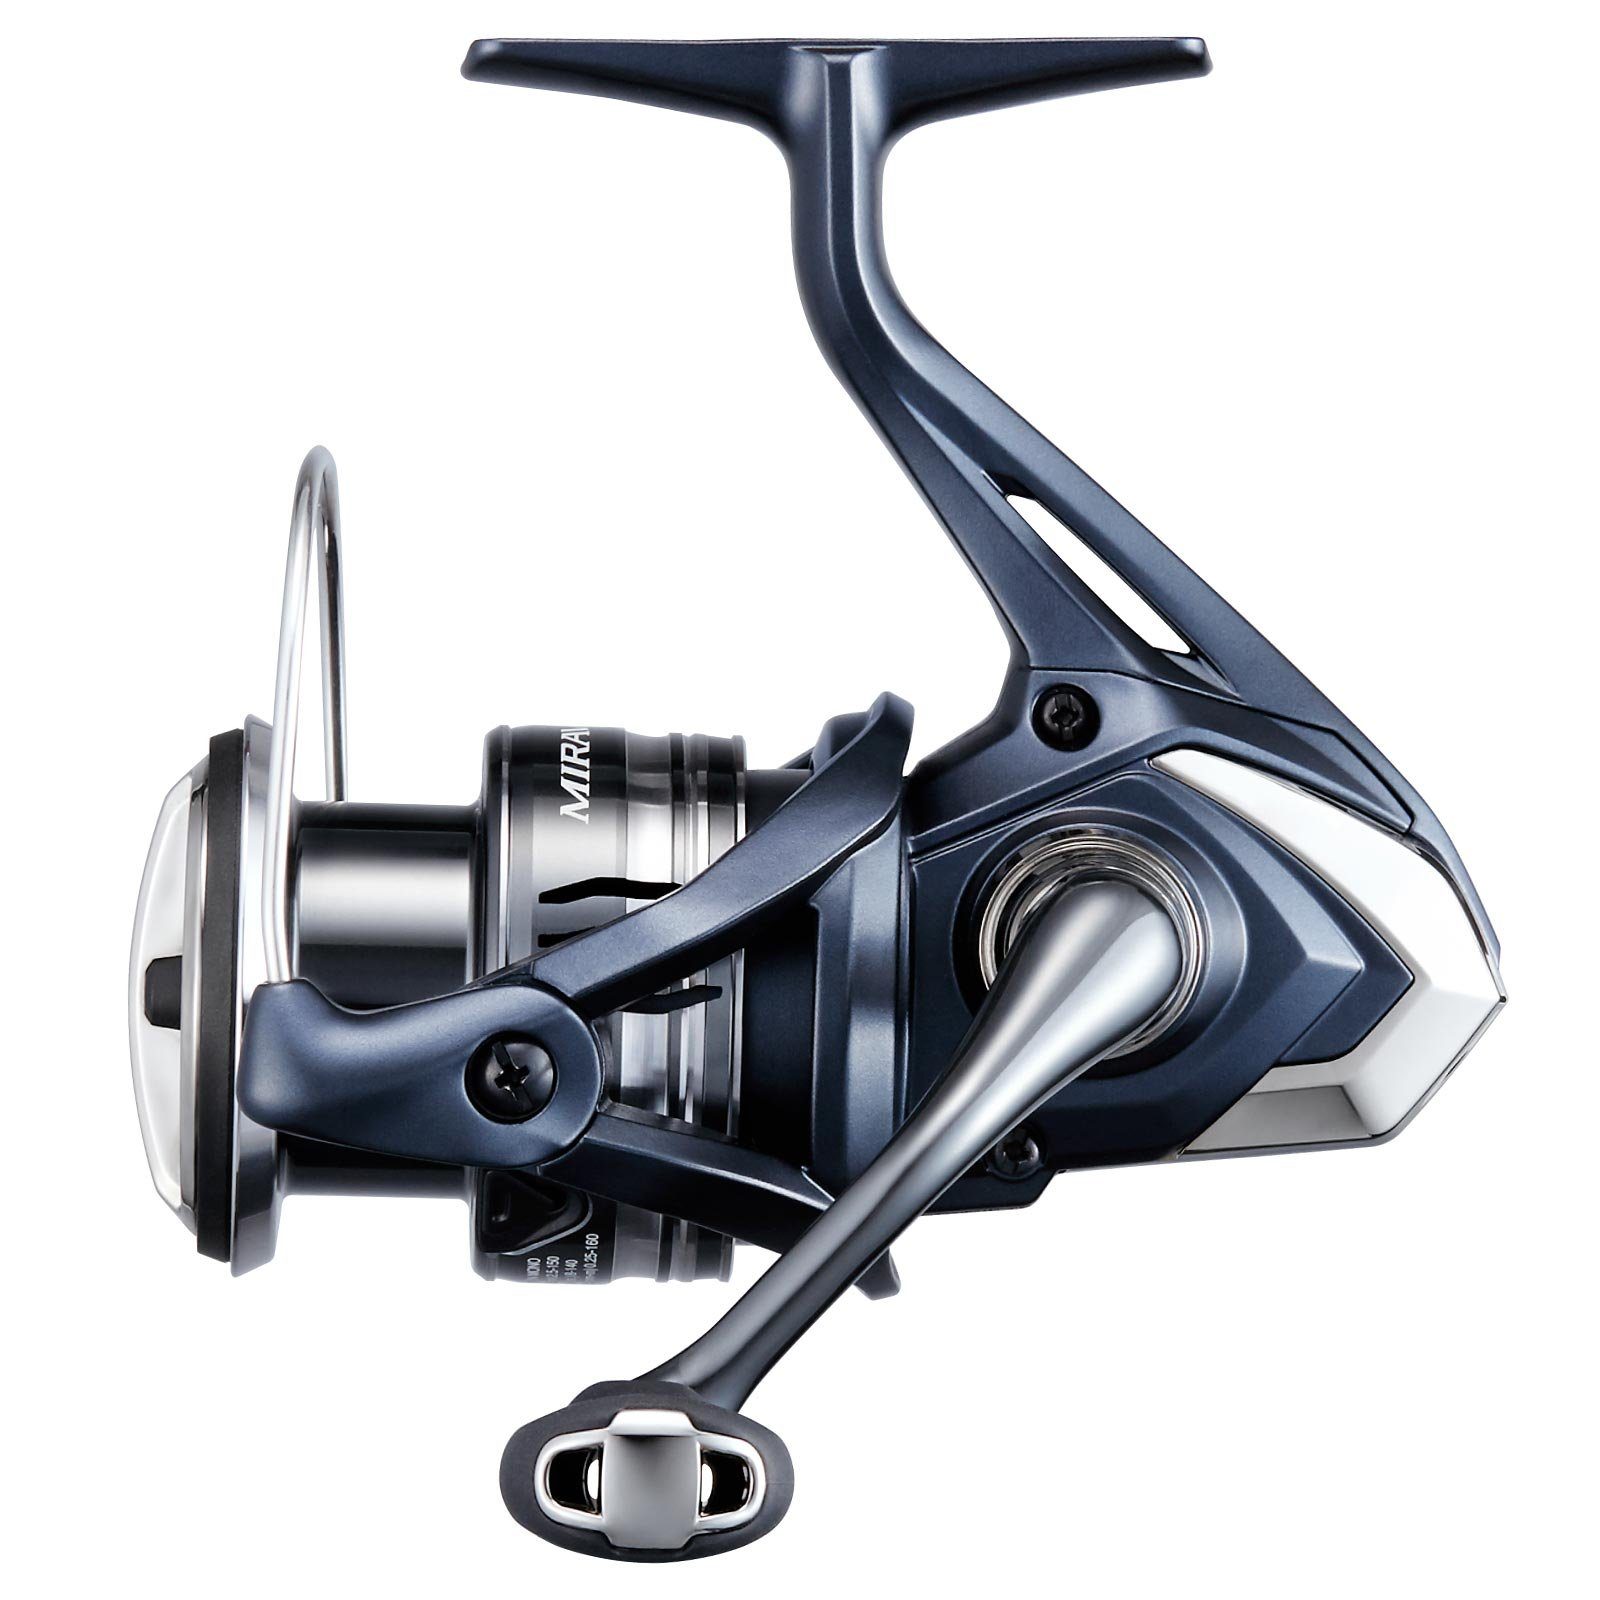 Spinnrolle), Angelrolle Shimano Spinnrolle Shimano Miravel 2500